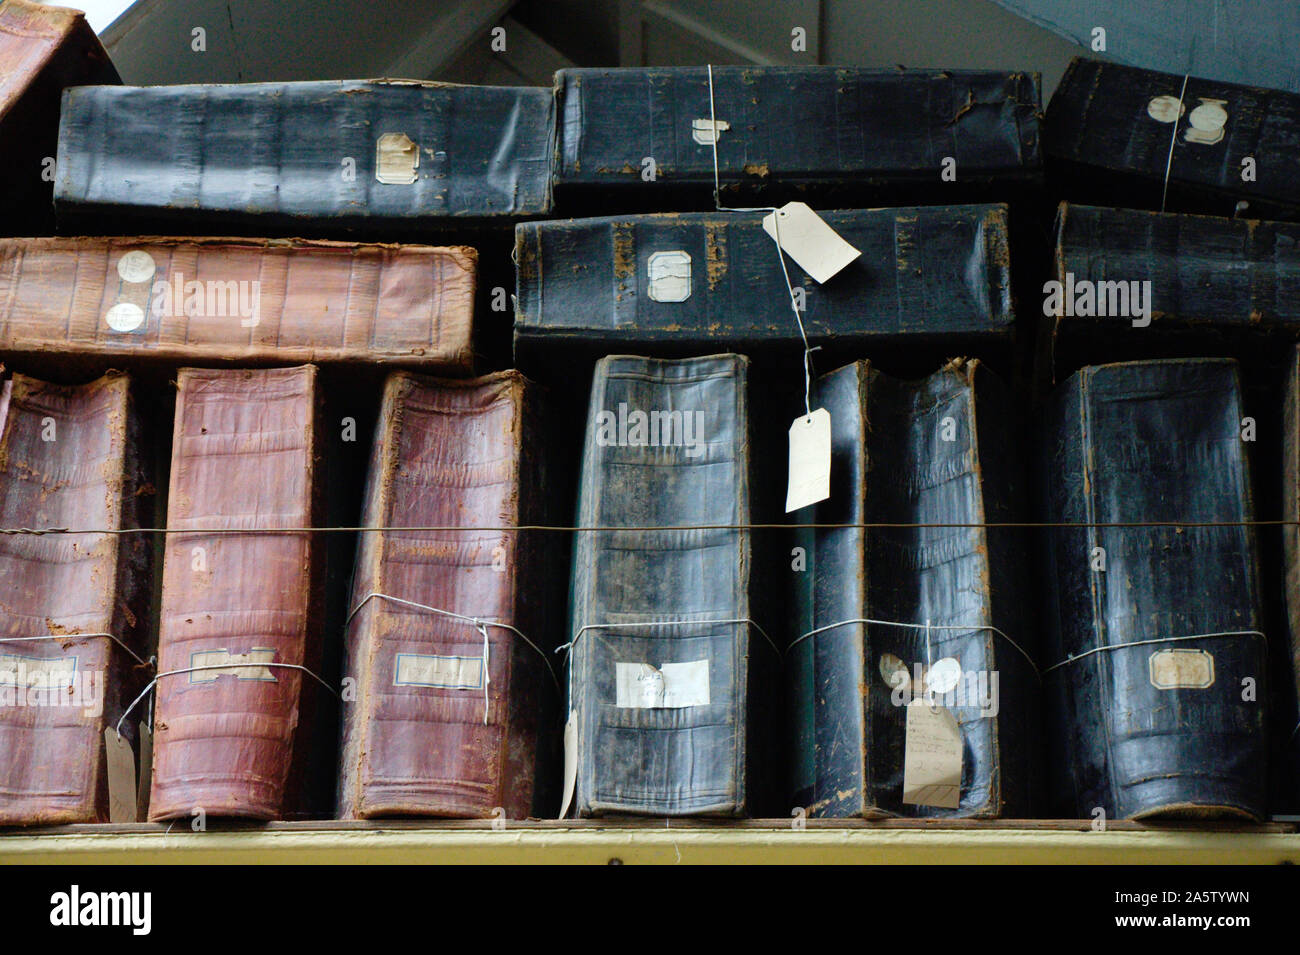 Accounting. Old stock-books on a shelf in an English 19th century textile factory. Stock Photo